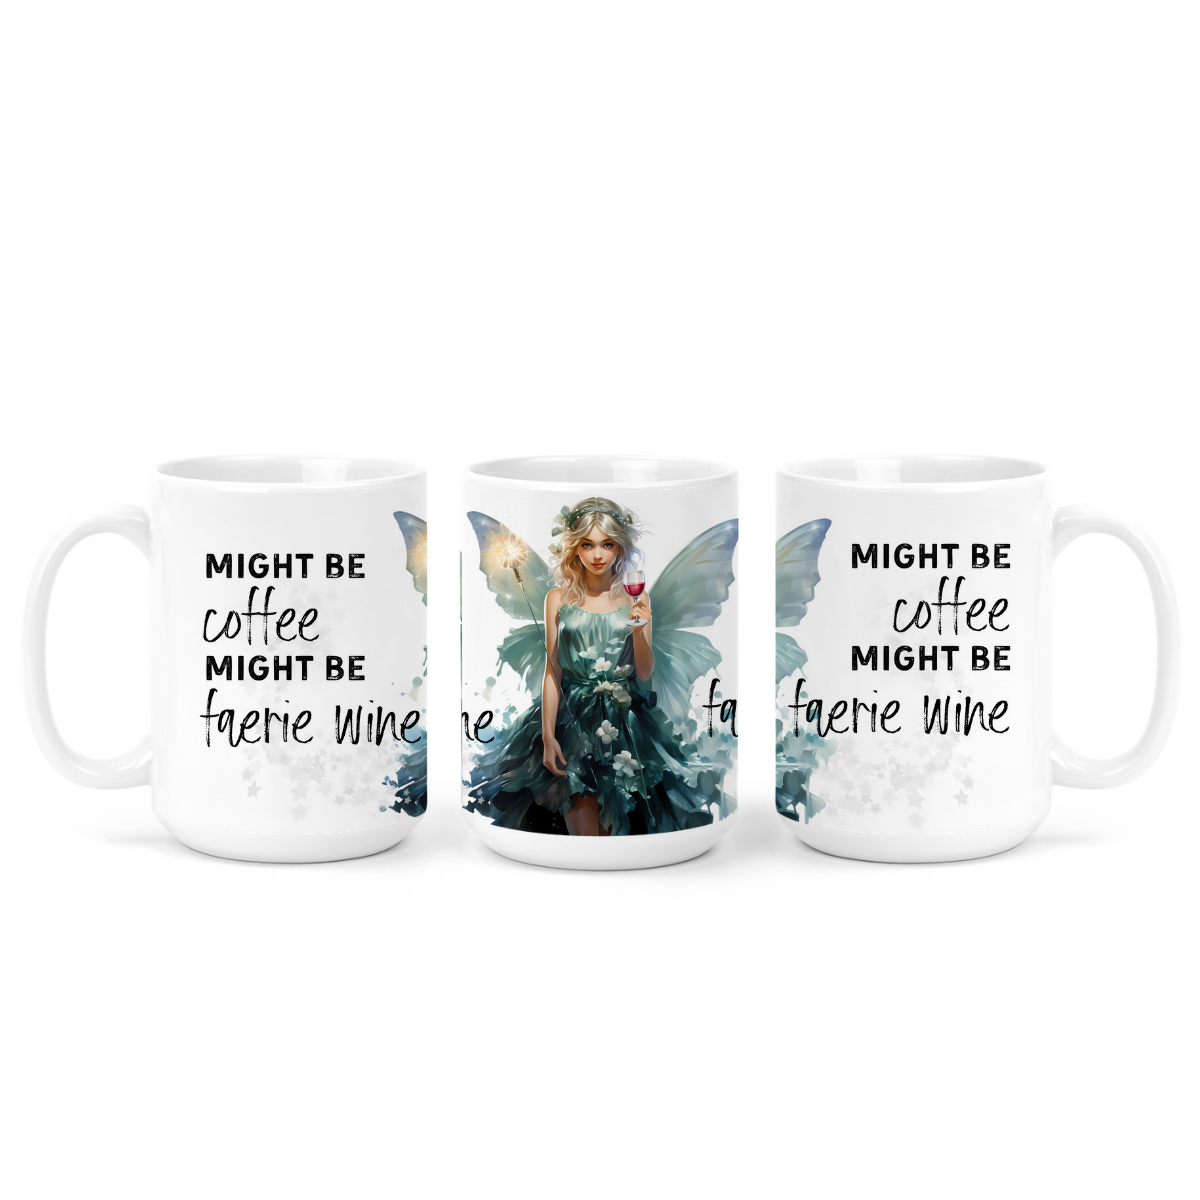 Might Be Coffee Might Be Faerie Wine | Mug - The Pretty Things.ca